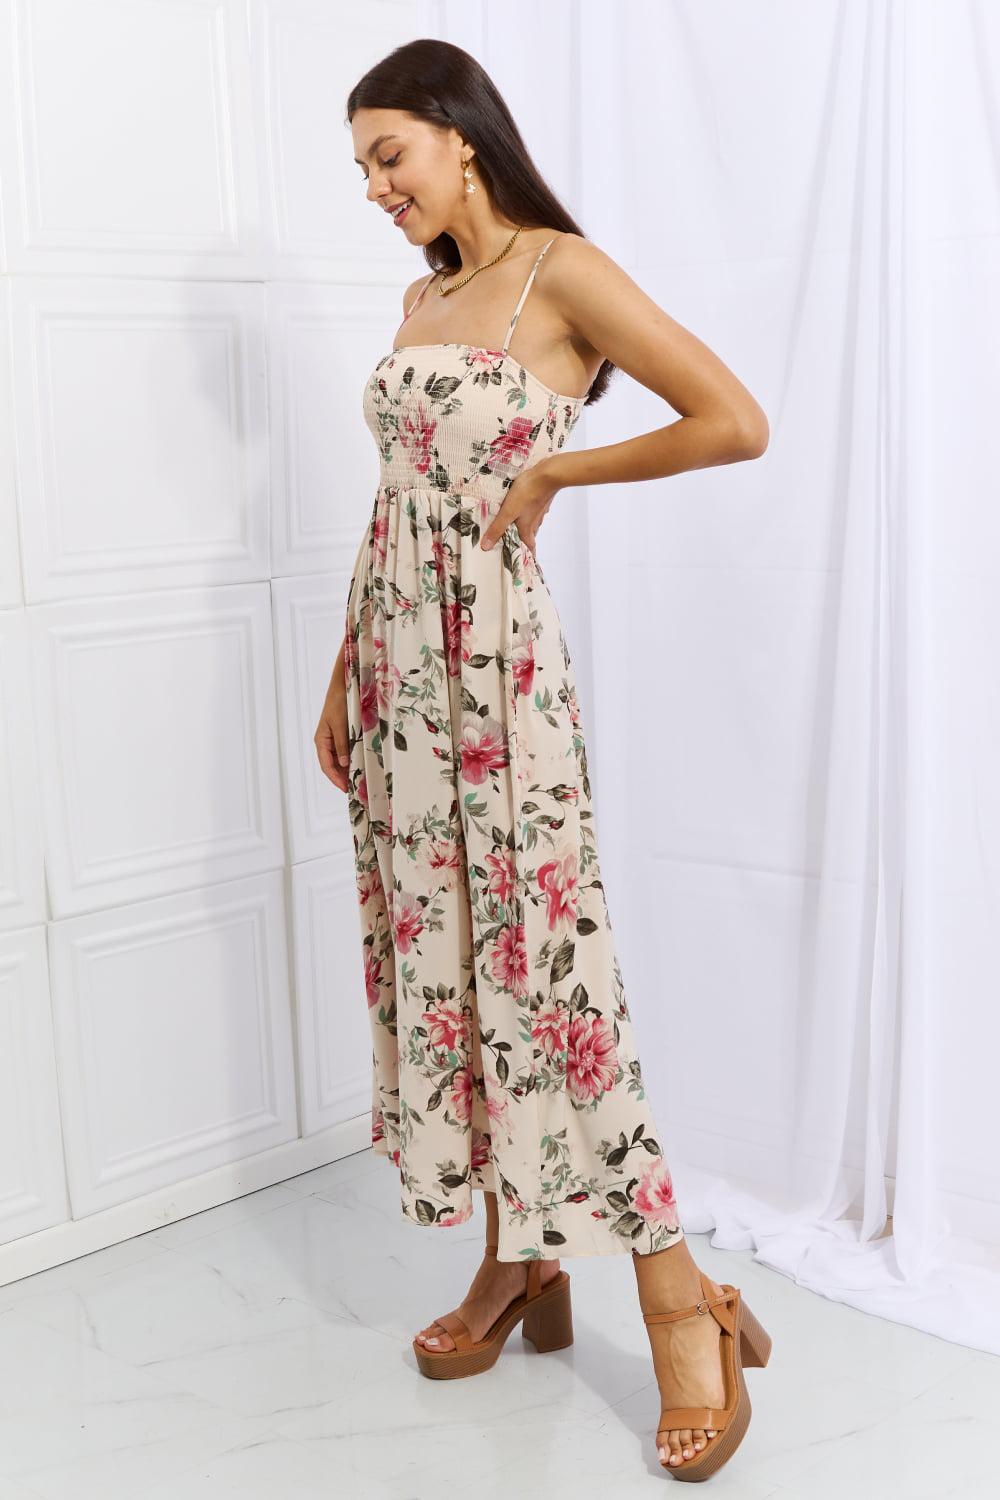 OneTheLand Hold Me Tight Sleevless Floral Maxi Dress in Pink BLUE ZONE PLANET